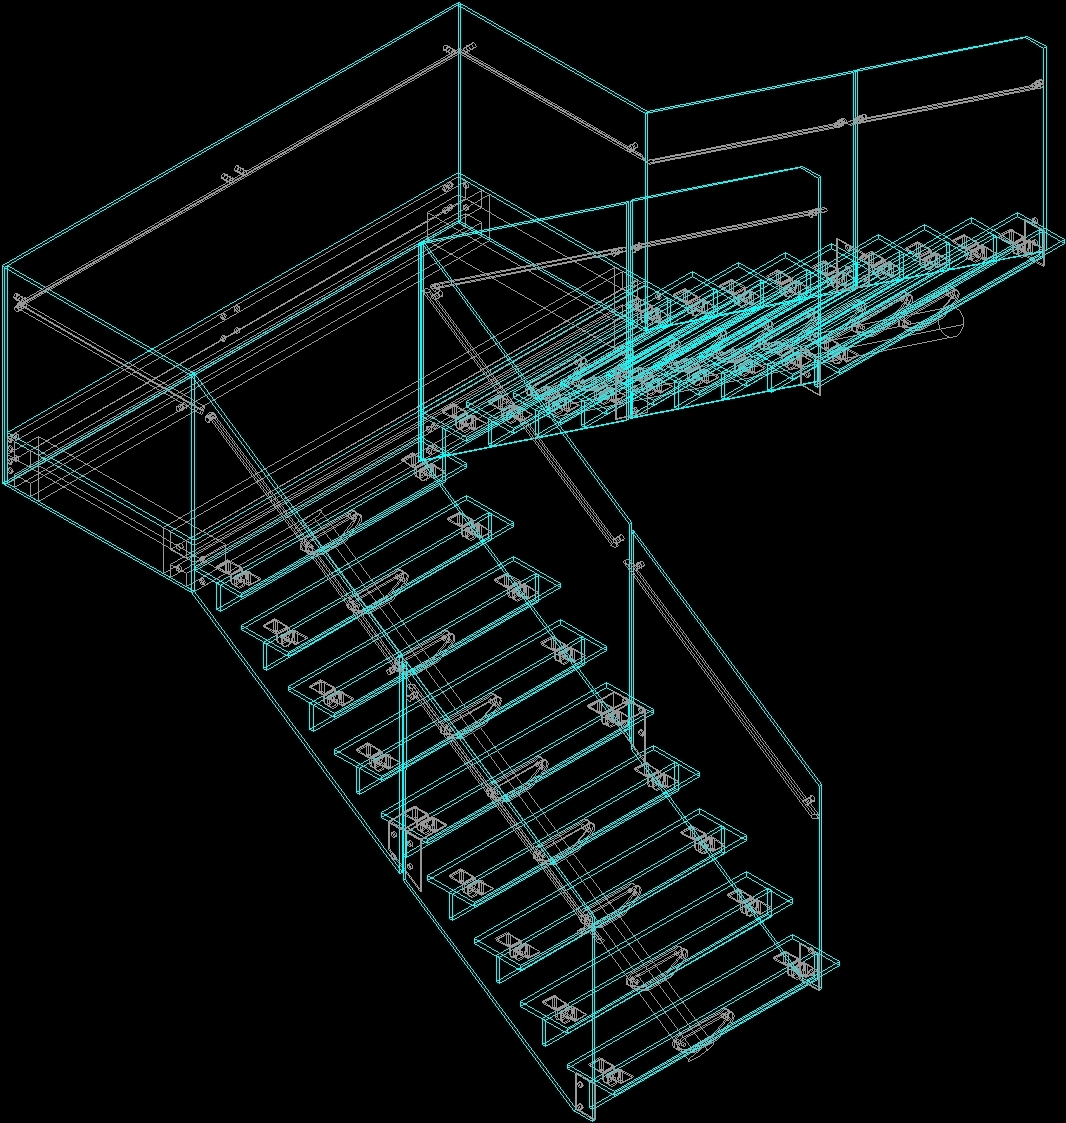 Staircase Design In Autocad  Stairs And Railings Details ...